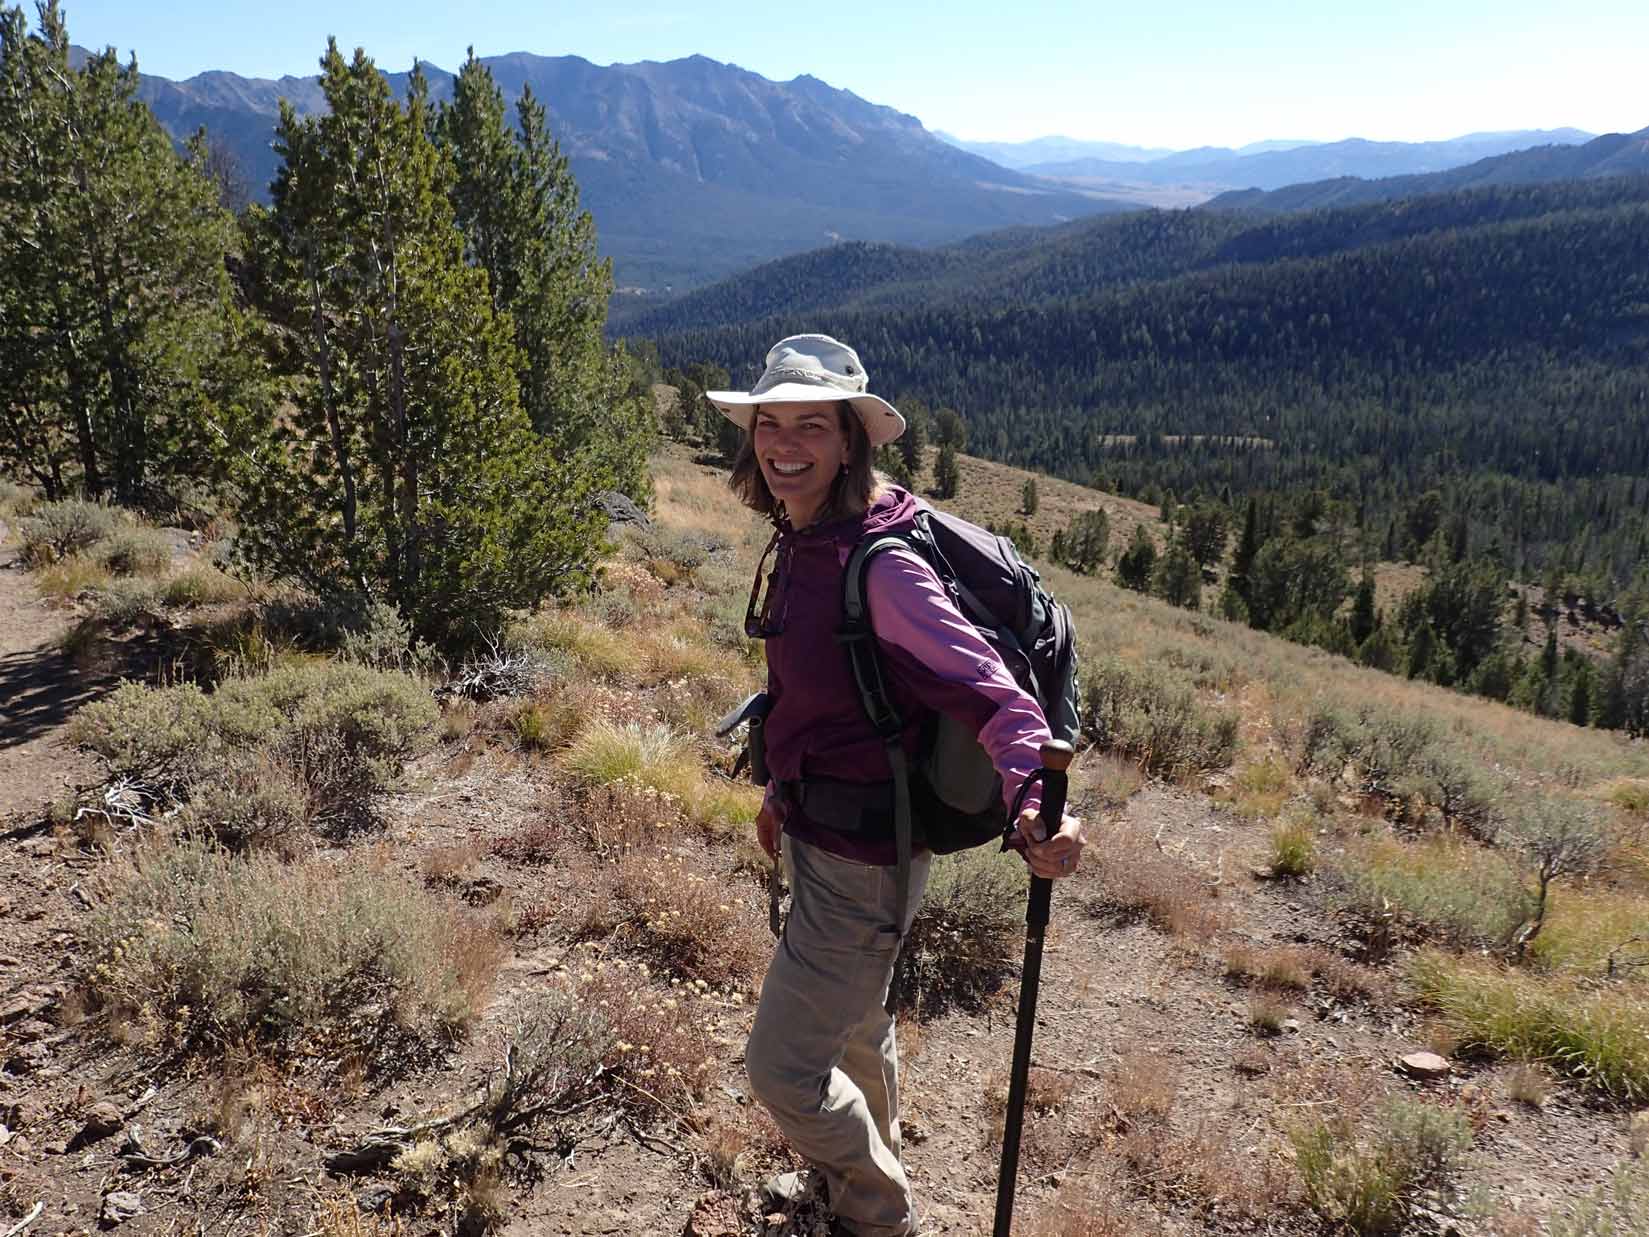 Sara Goeking (above), along with co-author and faculty mentor David Tarboton, received the prestigious 2022 Editors’ Choice Award from the American Geophysical Union journal Water Resources Research.